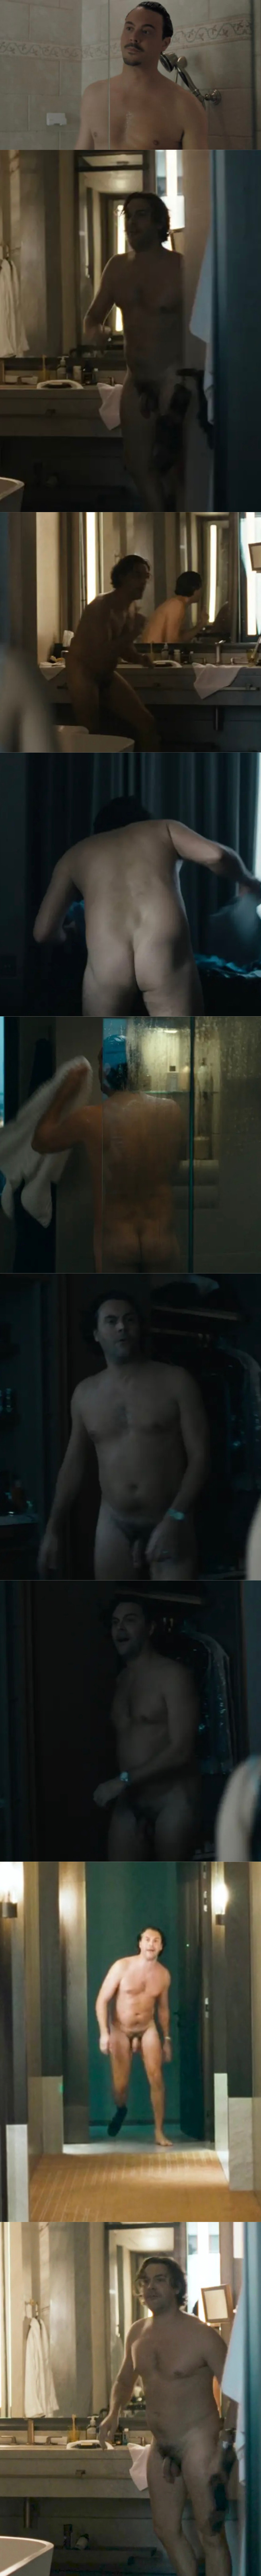 Jack Huston full frontal naked in Expats